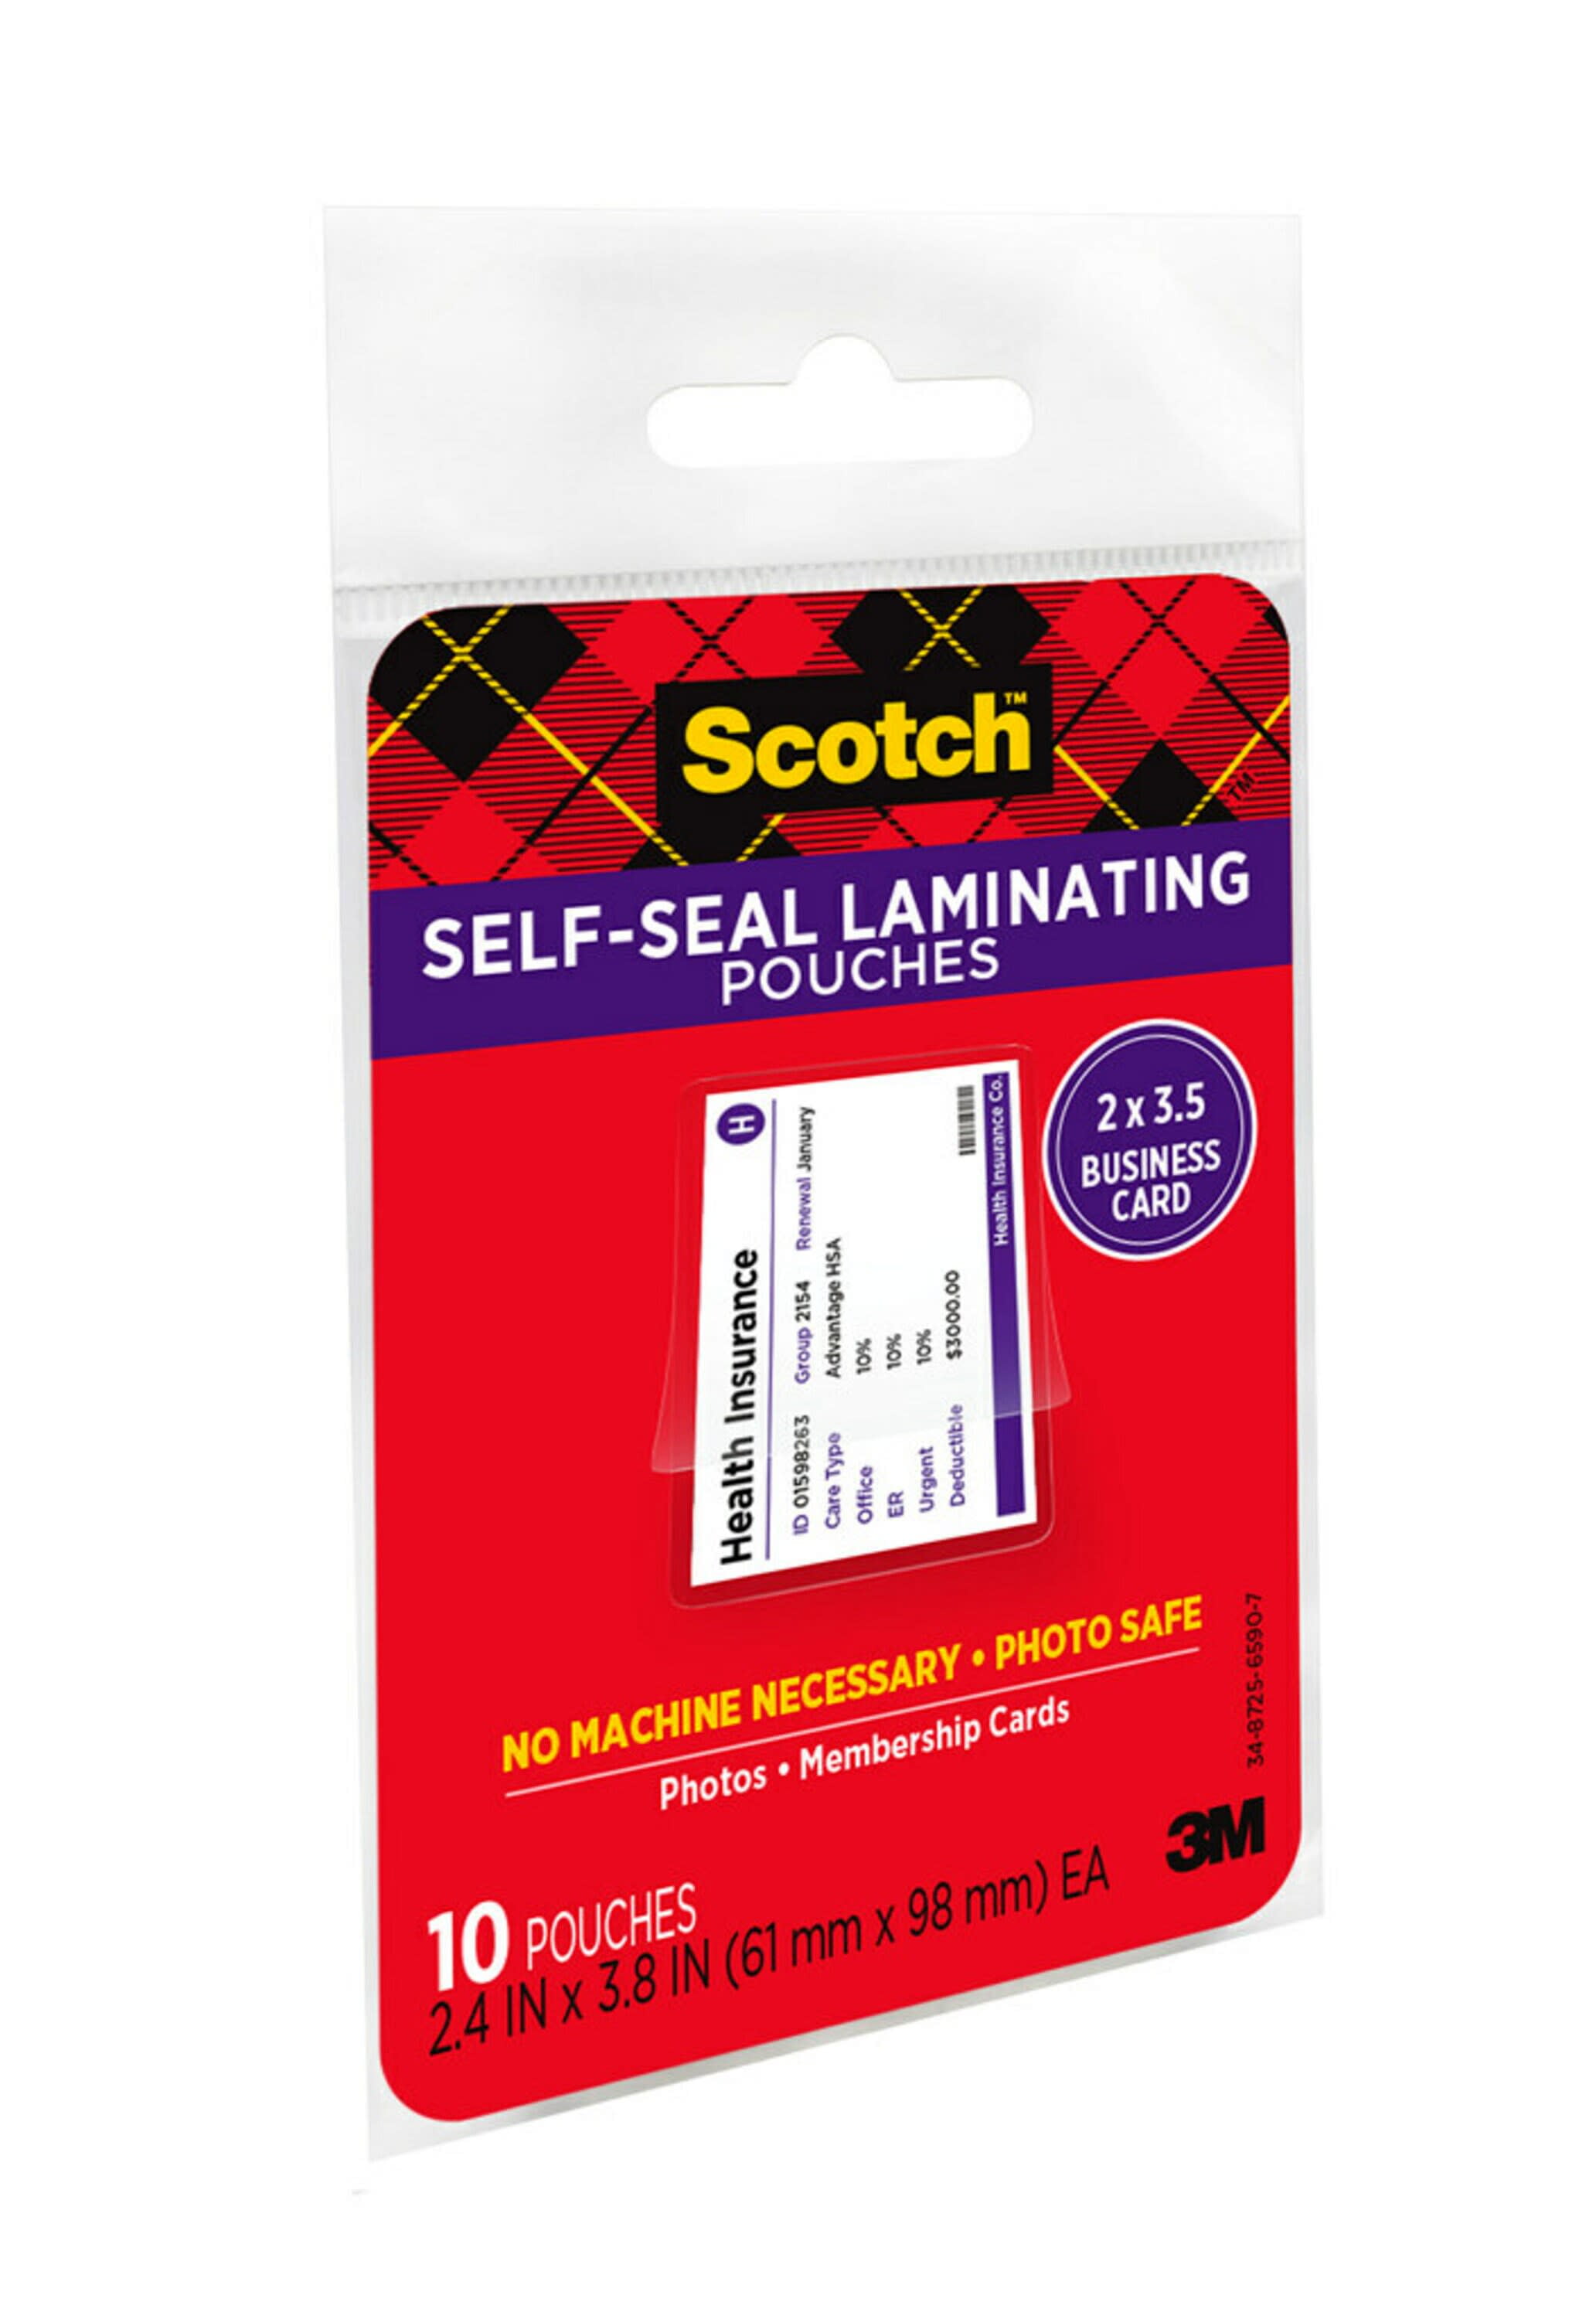 Scotch Self-sealing Laminating Pouches 3m 25 Sheets Gloss Finish Letter Size for sale online 